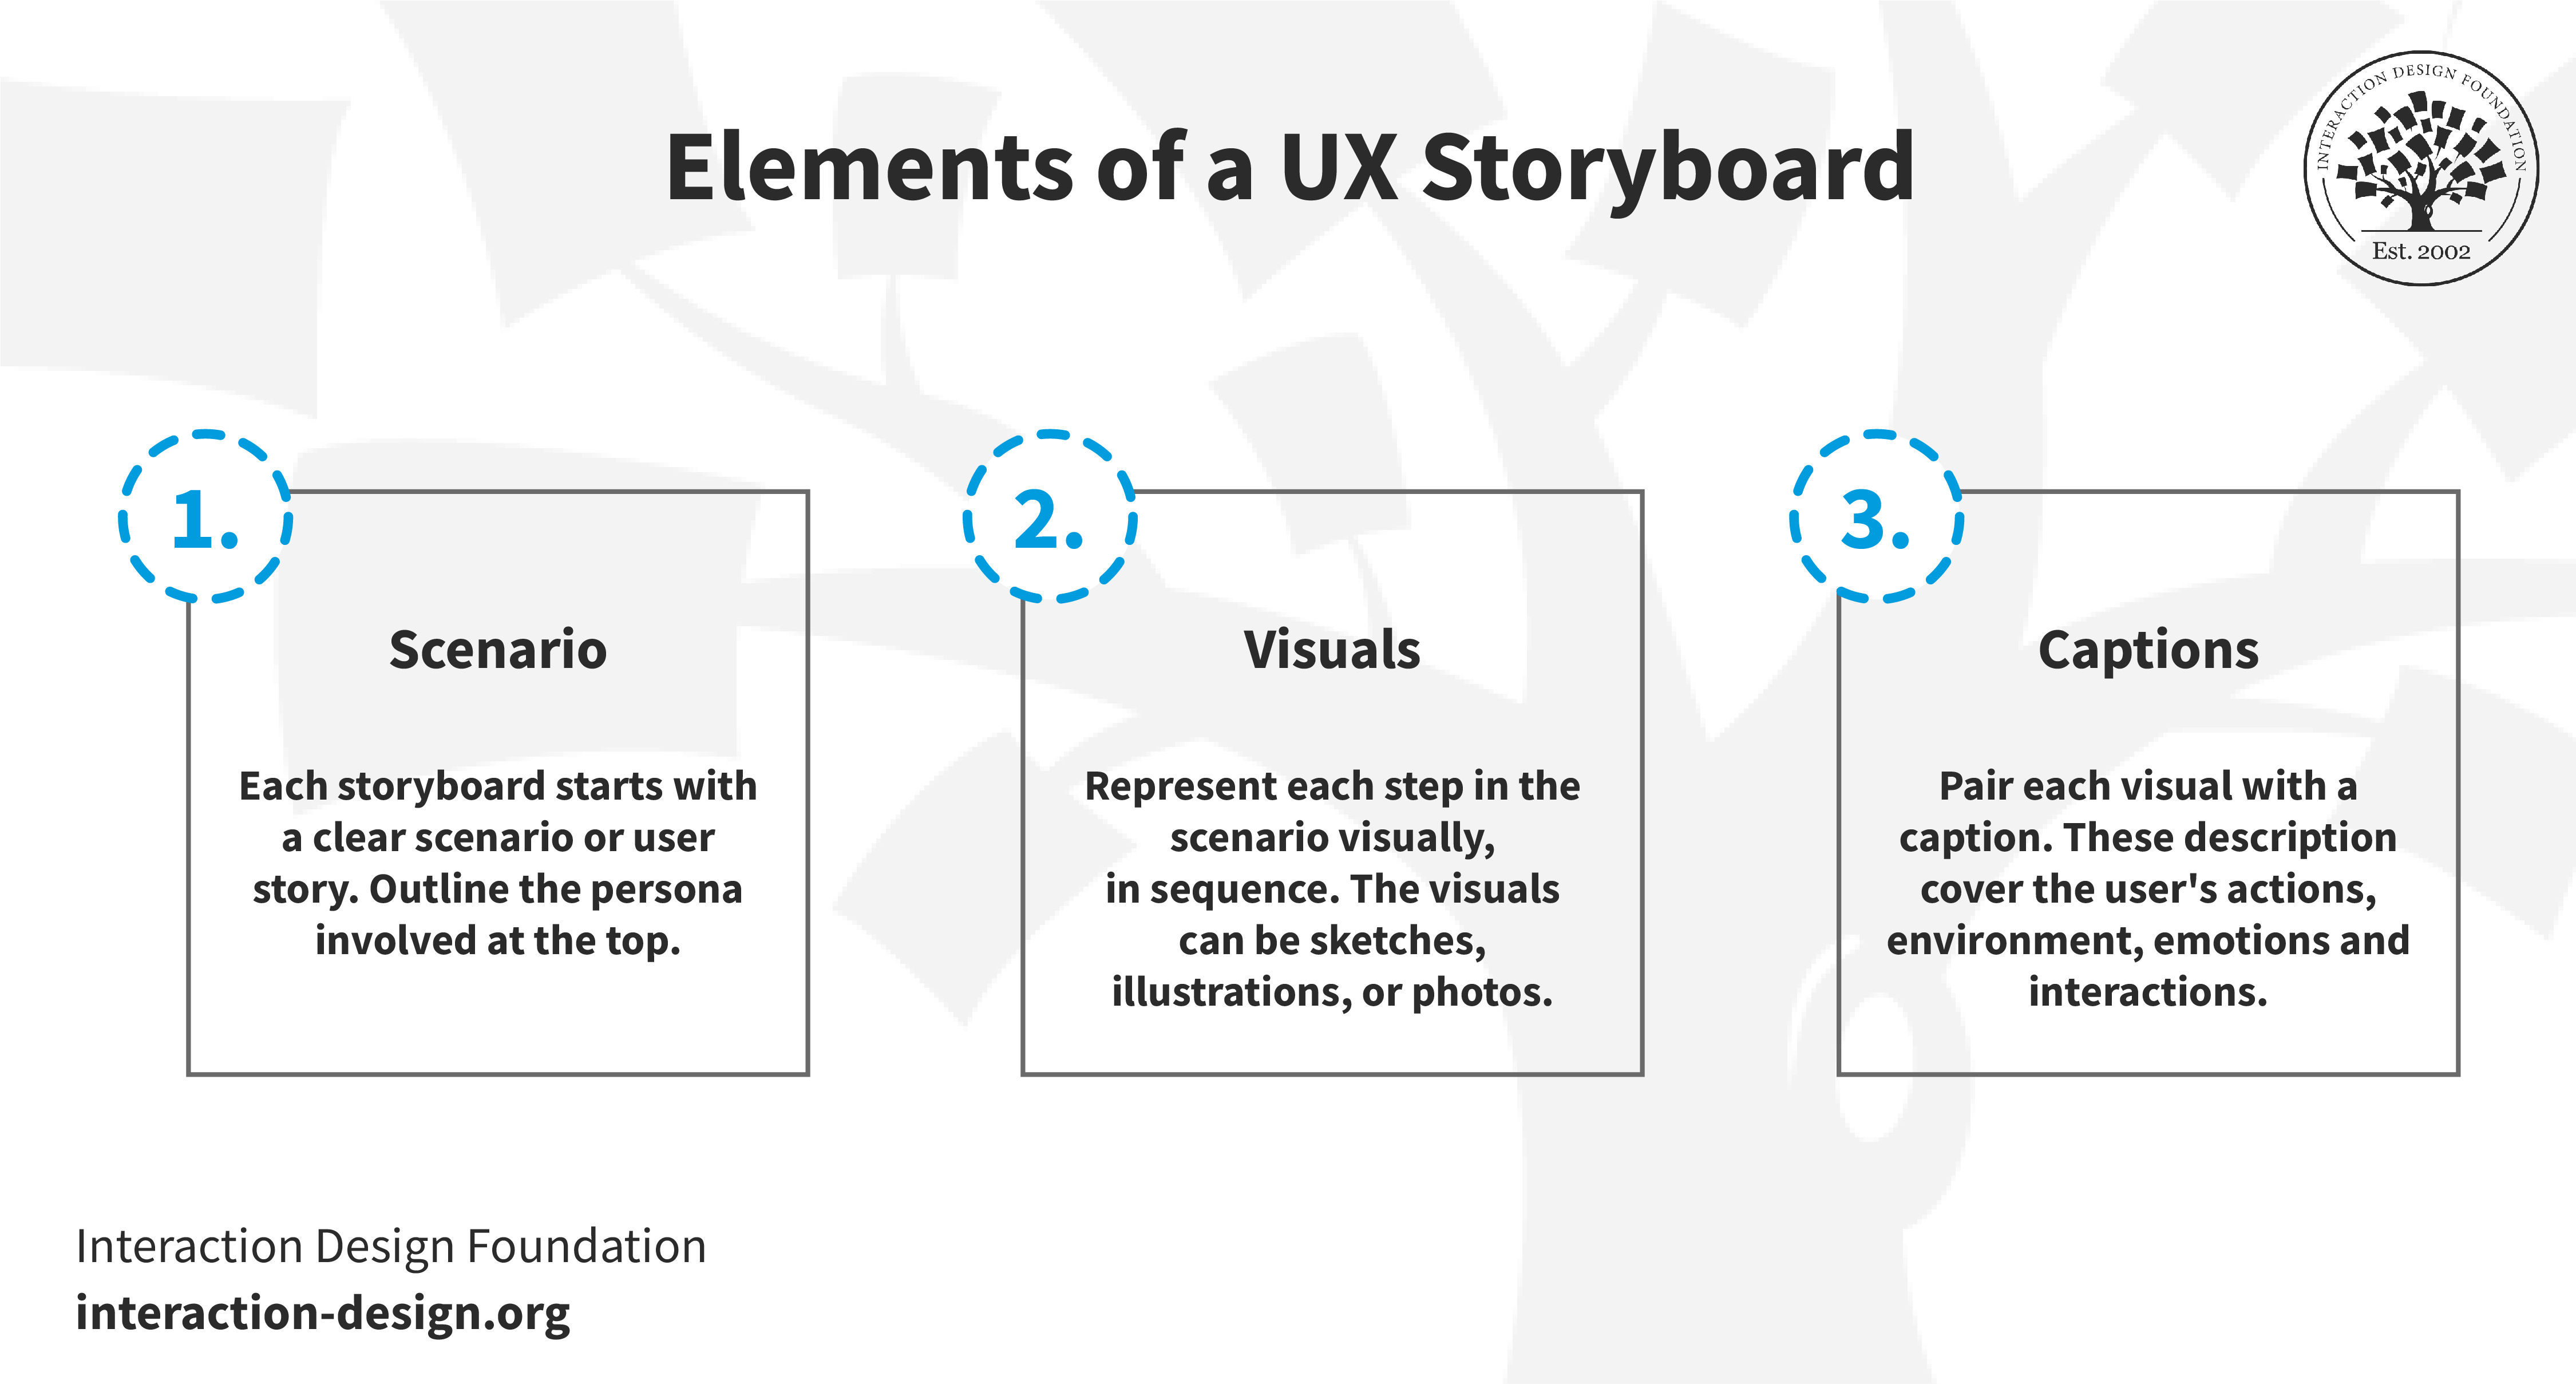 Three key elements of a UX storyboard: a specific scenario, visuals and captions.